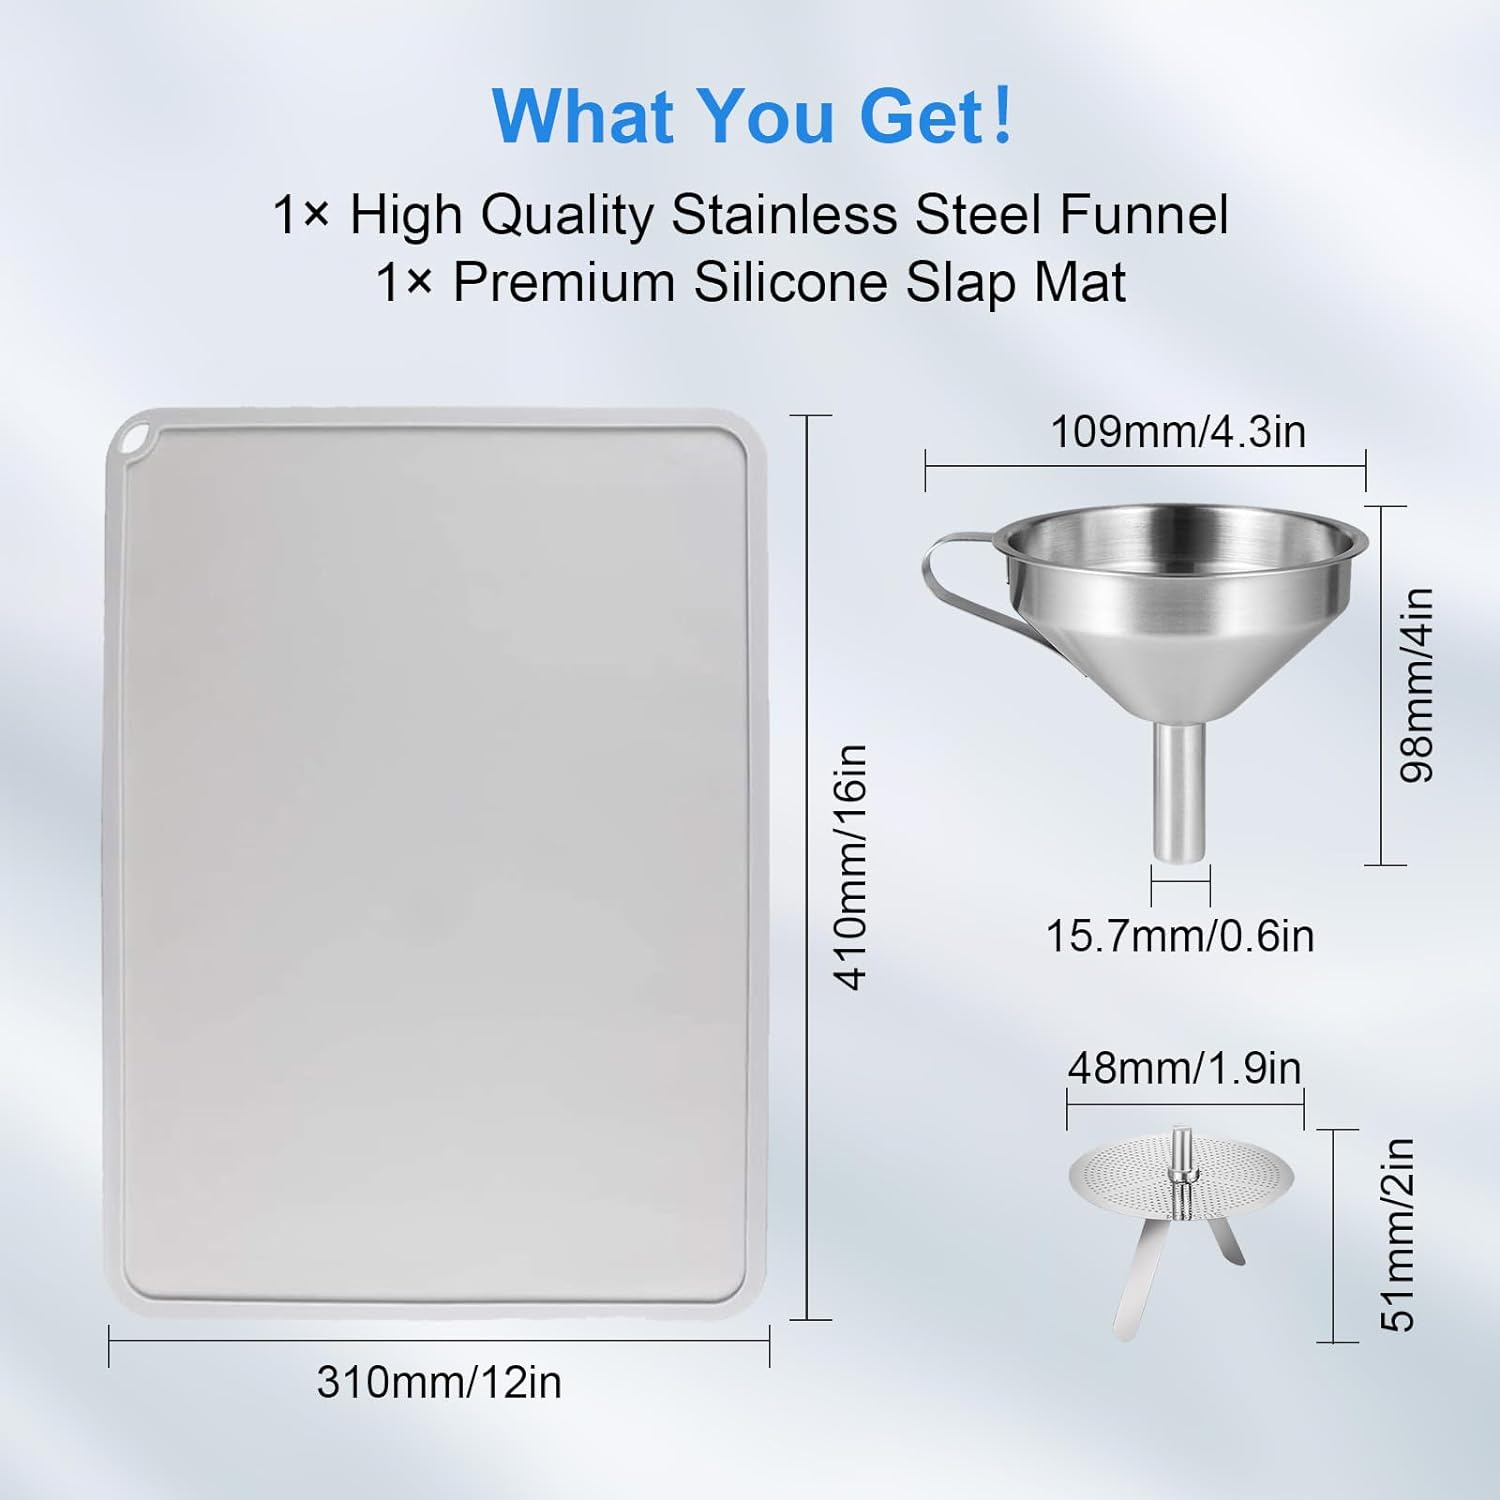 yoopai-funnel-and-mat-stainless-steel-filter-funnel-silicone-slap-mat-cleaning-kit-for-filtering-resin-and-recover-liqui-1 YOOPAI Funnel and Mat Review